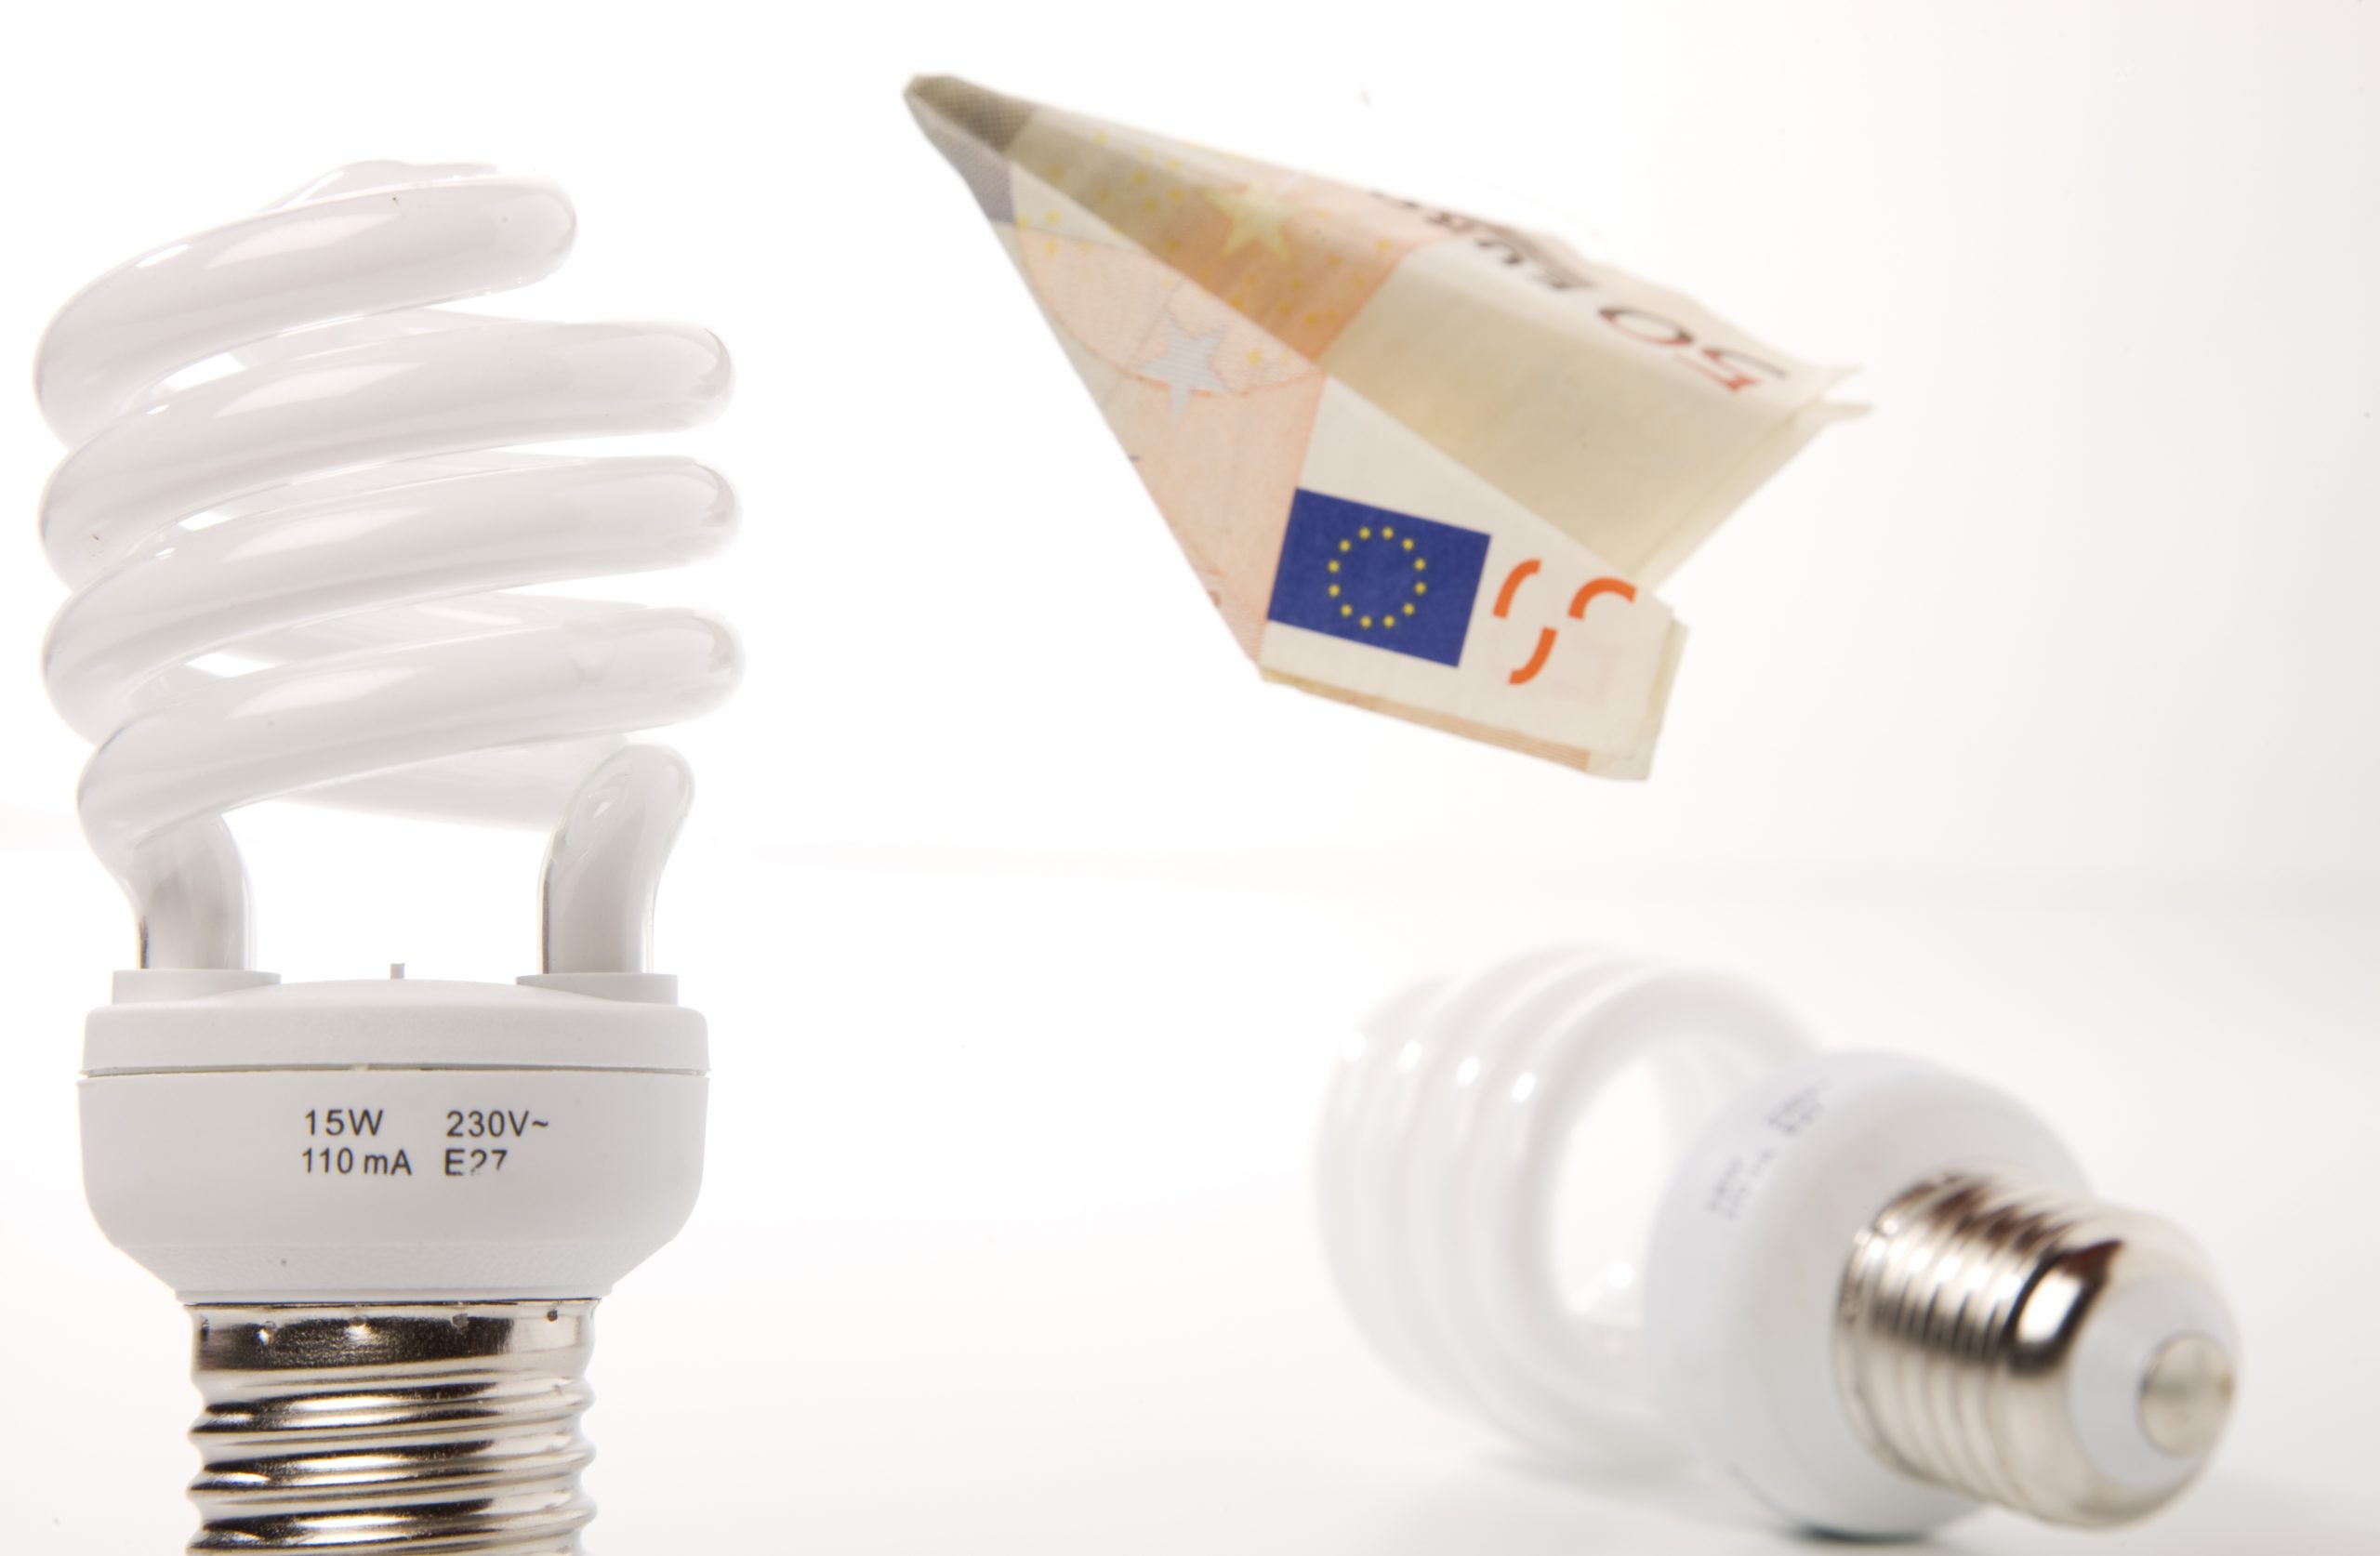 electricity. Image shows two lightbulbs with a €50 note folded into a paper aeroplane between them.